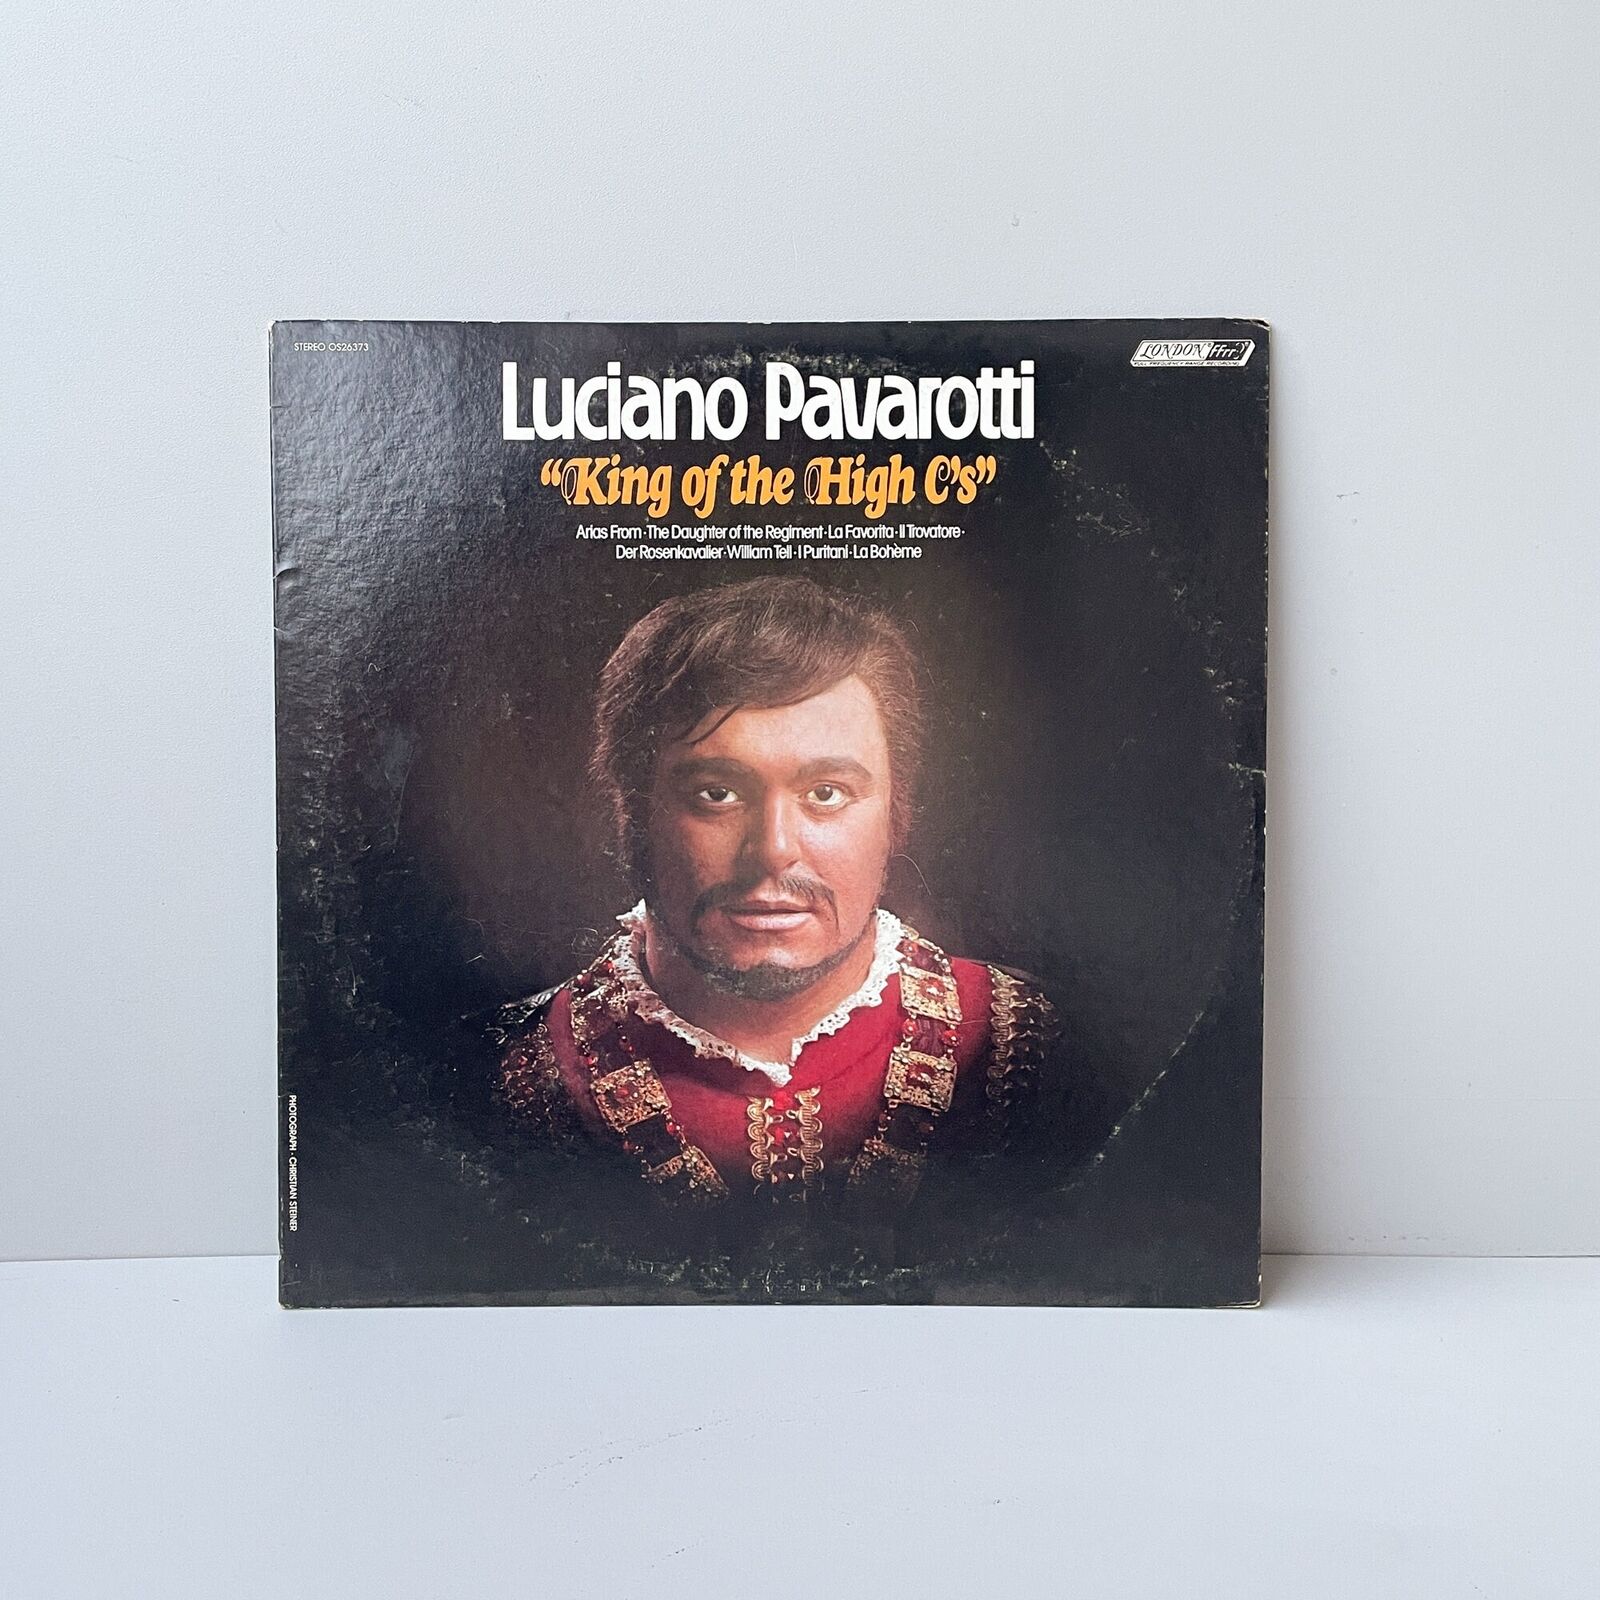 Luciano Pavarotti – King Of The High C's - Vinyl LP Record - 1973